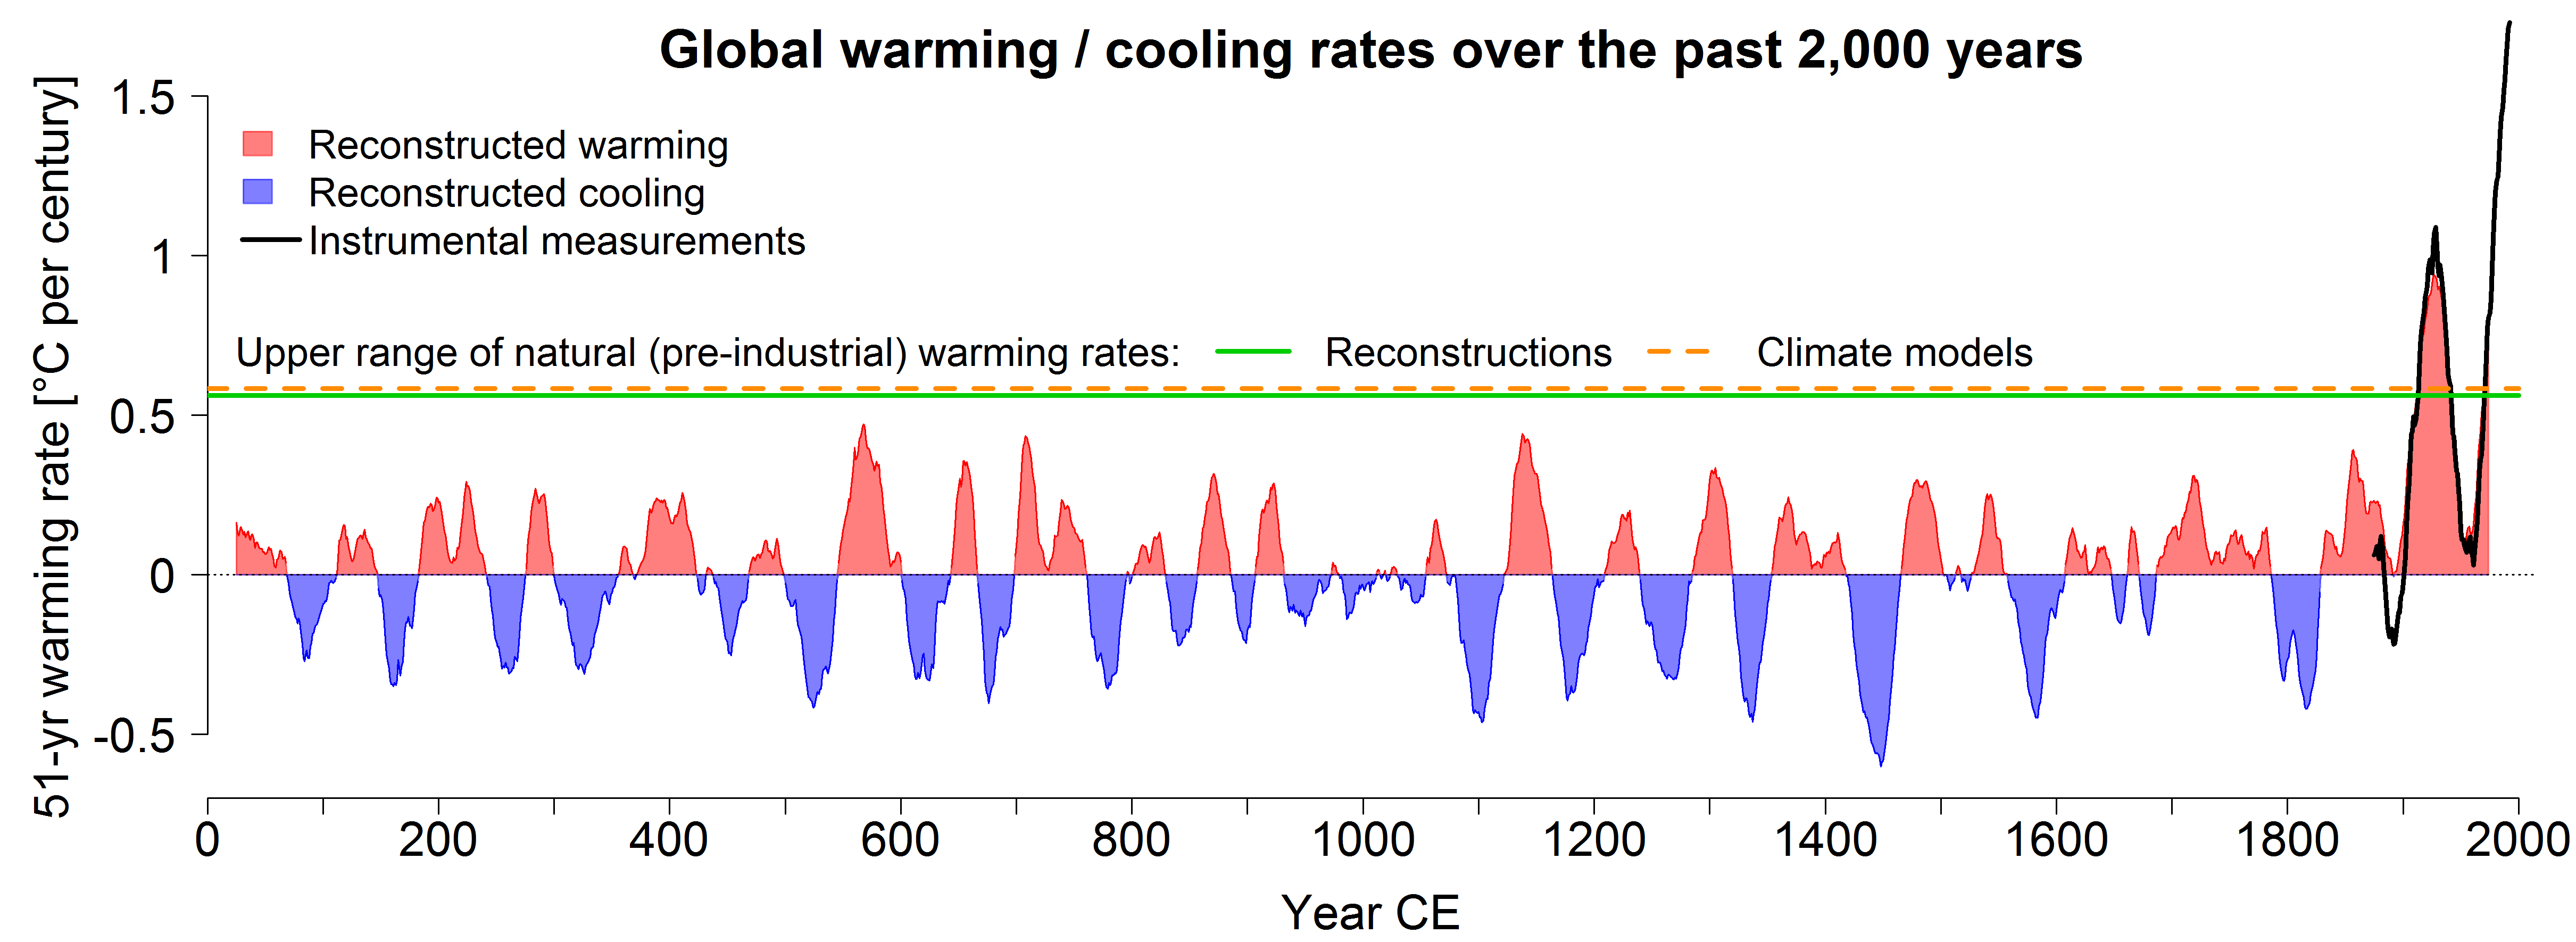 Global mean warming / cooling rates over the last 2,000 years. In red are the periods (each across 51 years) in which the reconstructed temperatures increased. Global temperatures decreased in the periods in blue. The green line shows that the maximum expected warming rate without anthropogenic influence is just under 0.6 degrees per century. Climate models (dashed orange line) are able to simulate this natural upper limit very well. At more than 1.7 degrees per century, the current rate of warming is significantly higher than the expected natural rate of warming, and higher than values for every previous century. Instrumental measurements since 1850 (in black) confirm these figures. © University of Bern